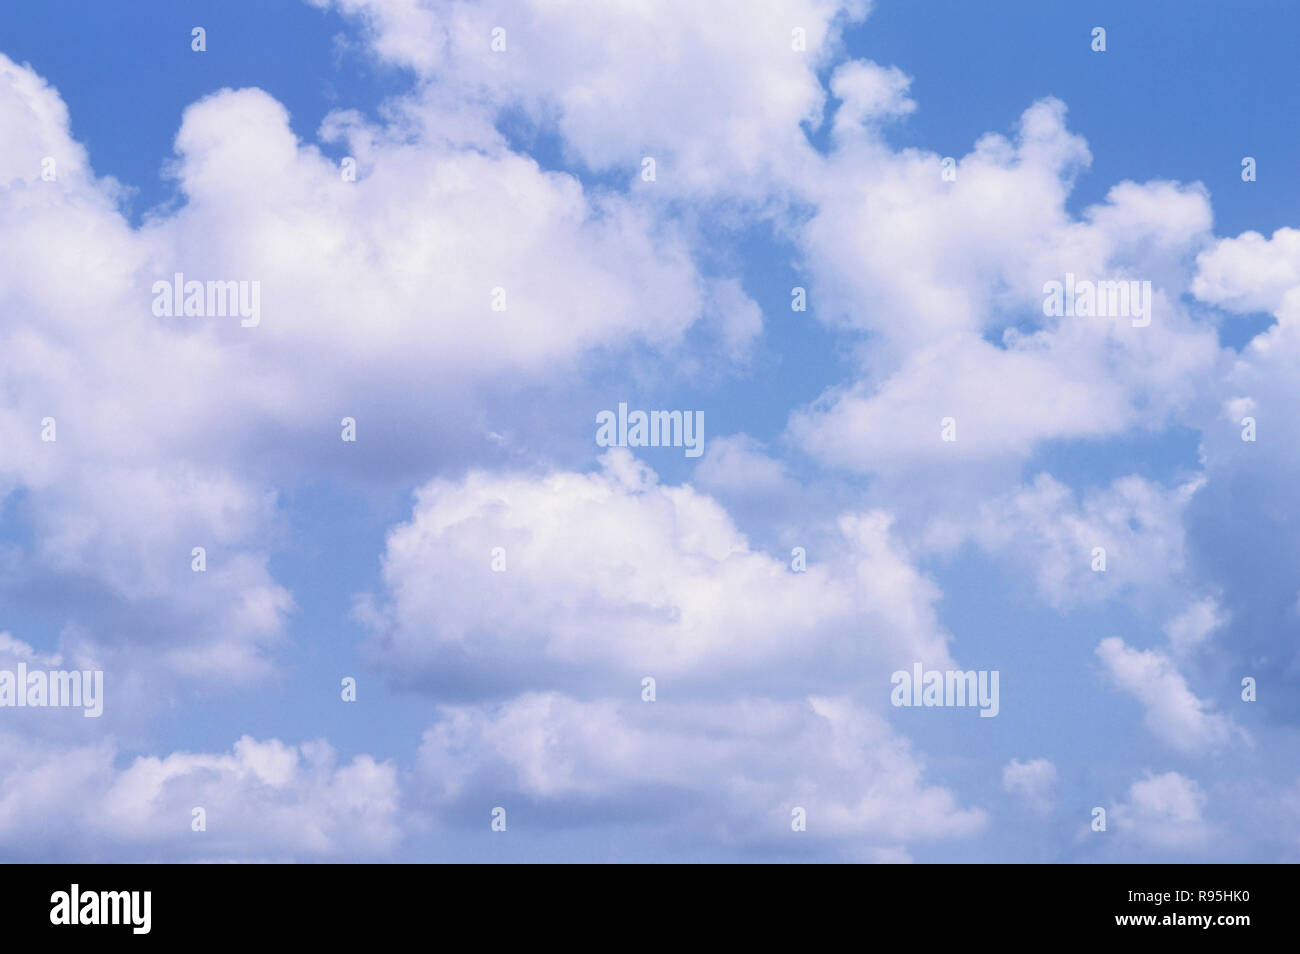 Blue sky with white clouds Stock Photo